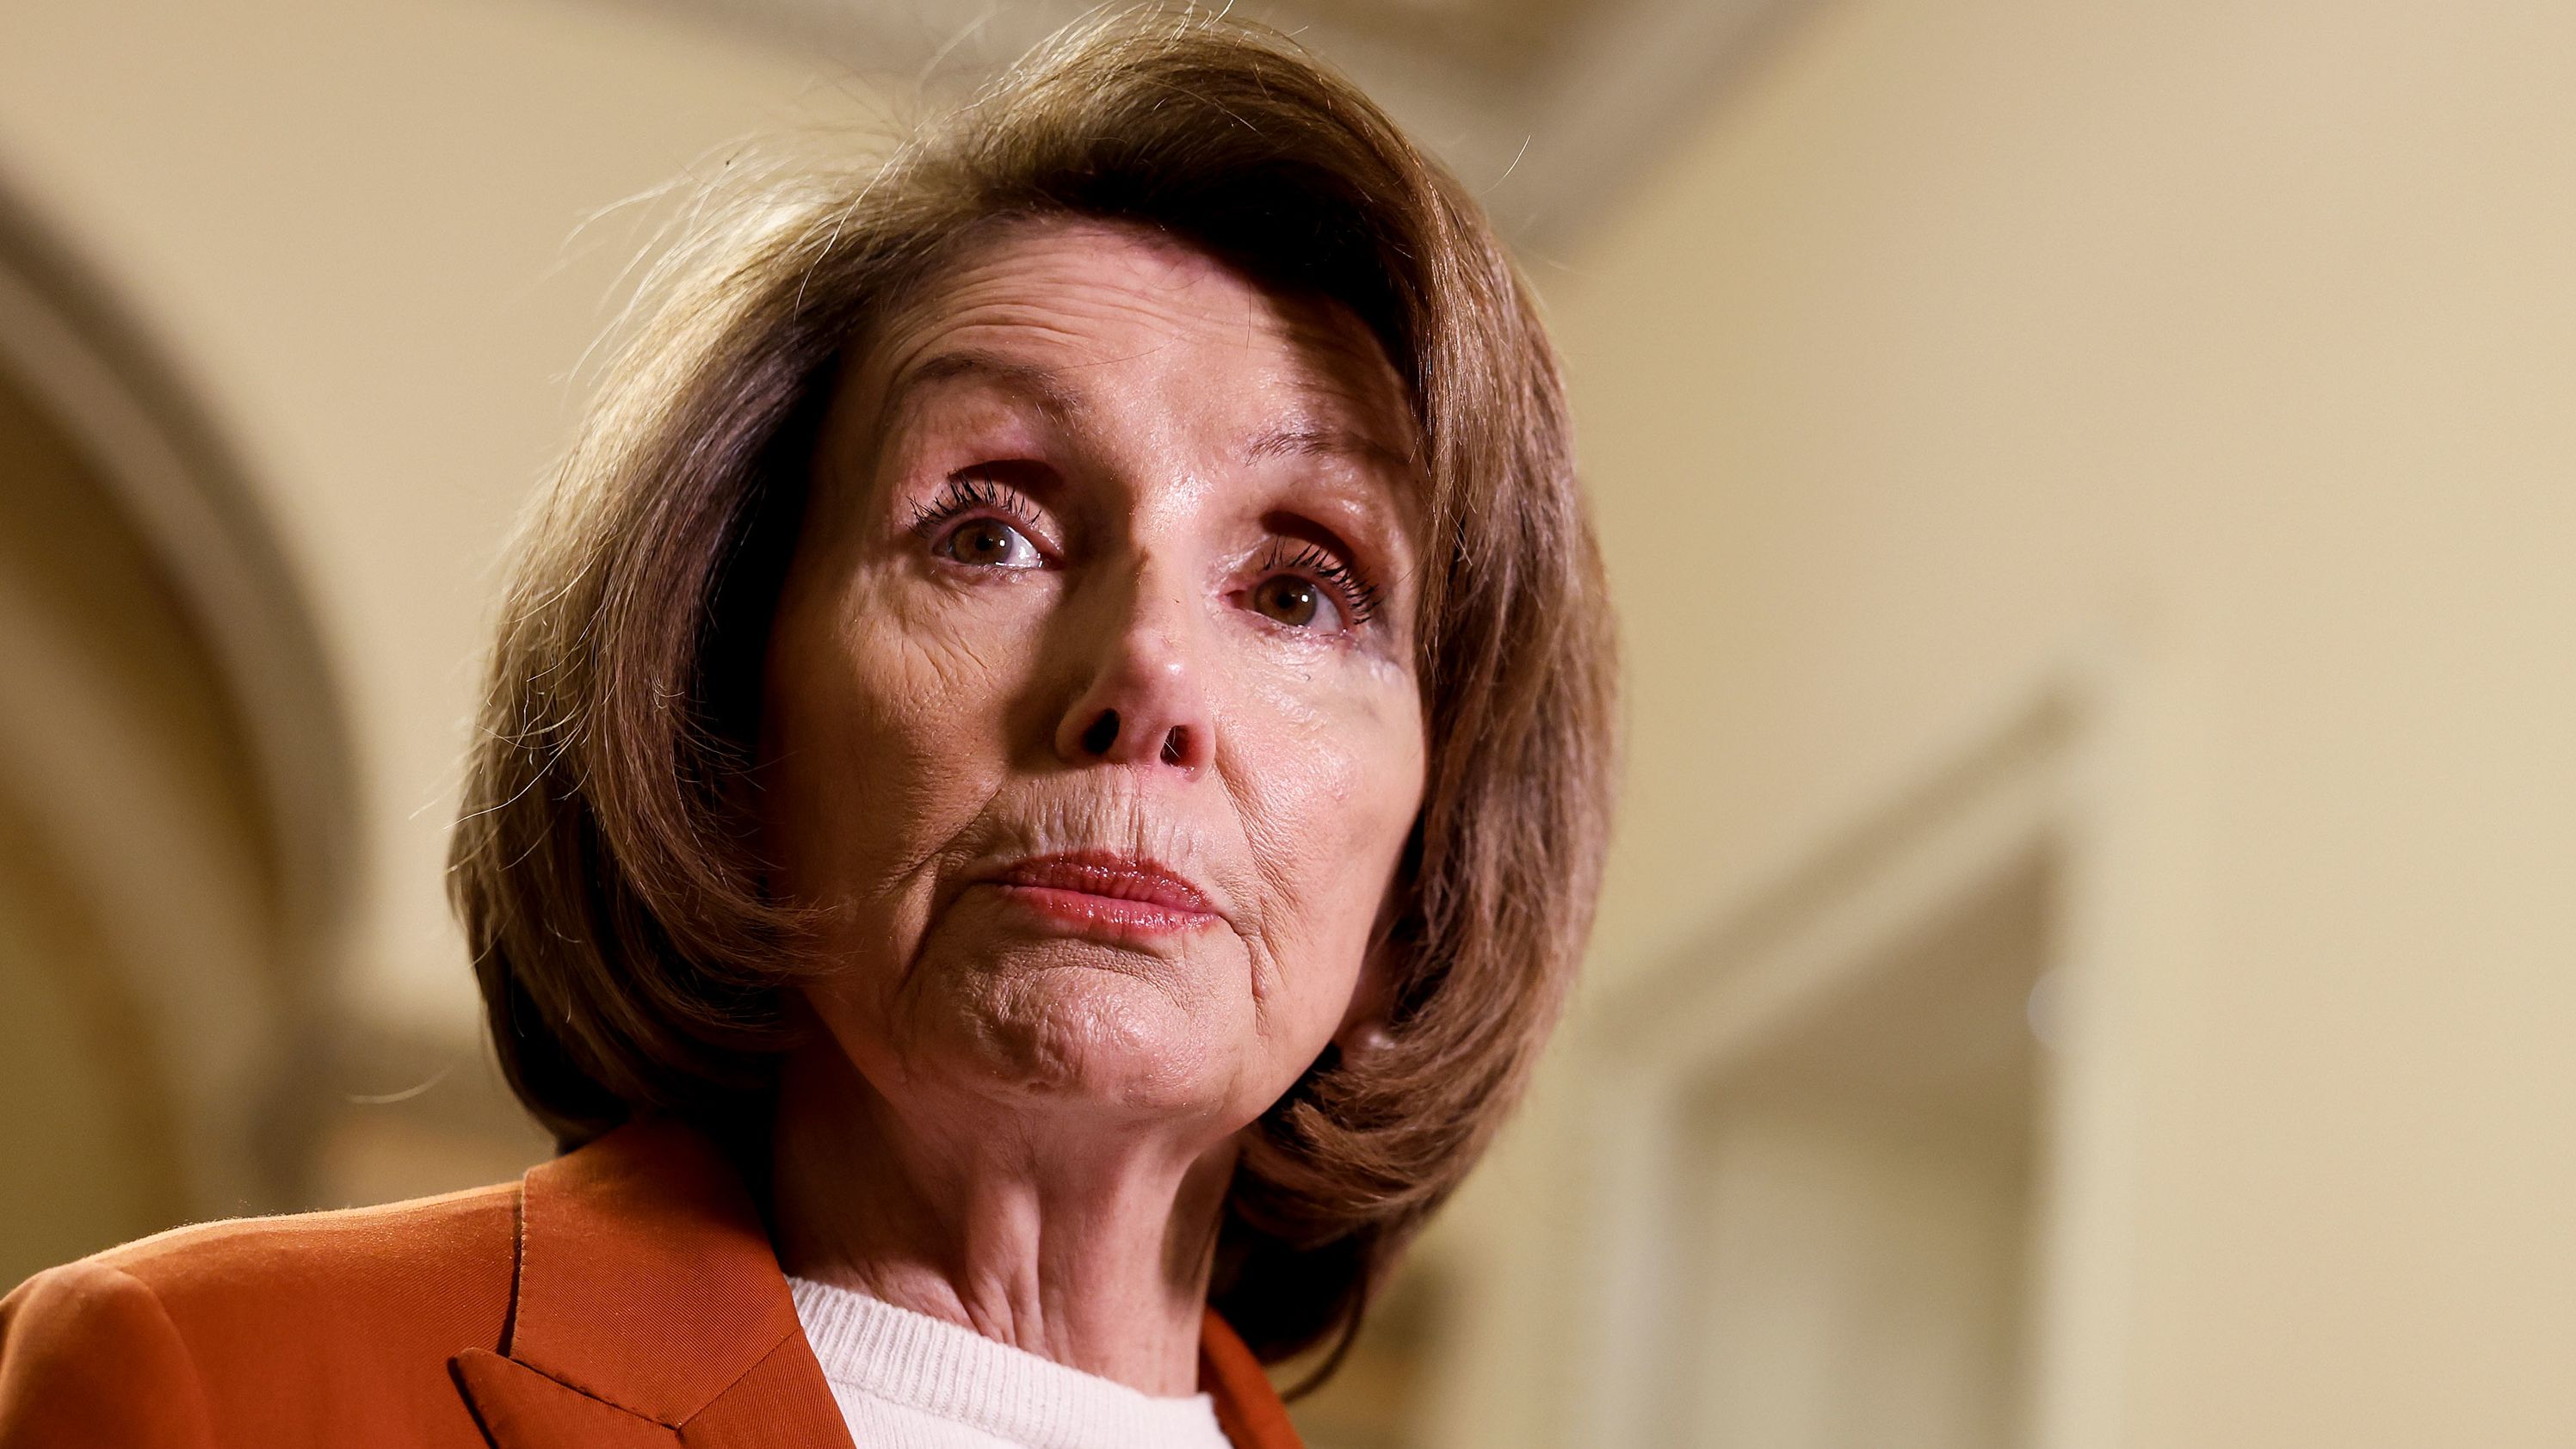 Pelosi privately told Biden polls show he cannot win and will take down the House; Biden responded with defensiveness | CNN Politics